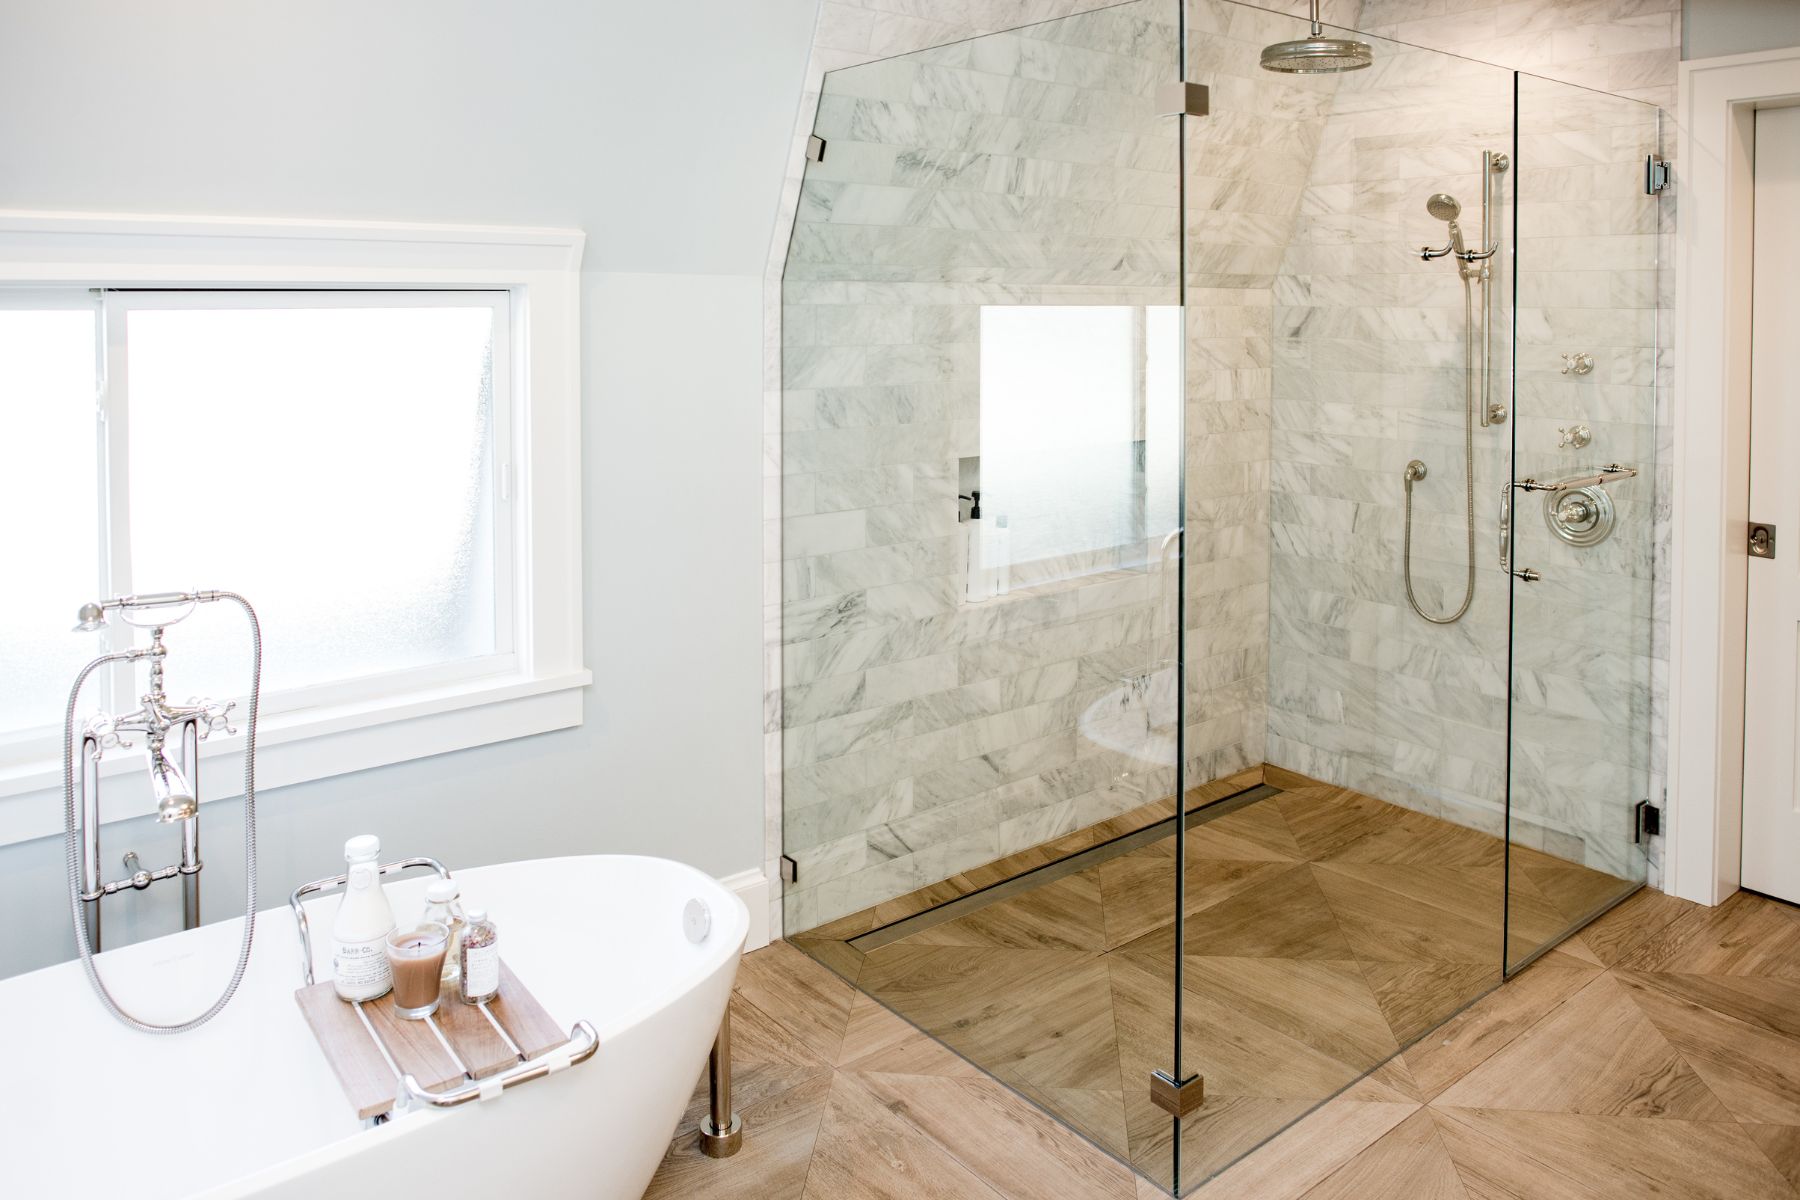 Elevate-Your-Home-with-Quiet-Luxury-A-Comprehensive-Guide-to-Remodeling-a-Bathroom-CRD-Design-Build-1-1